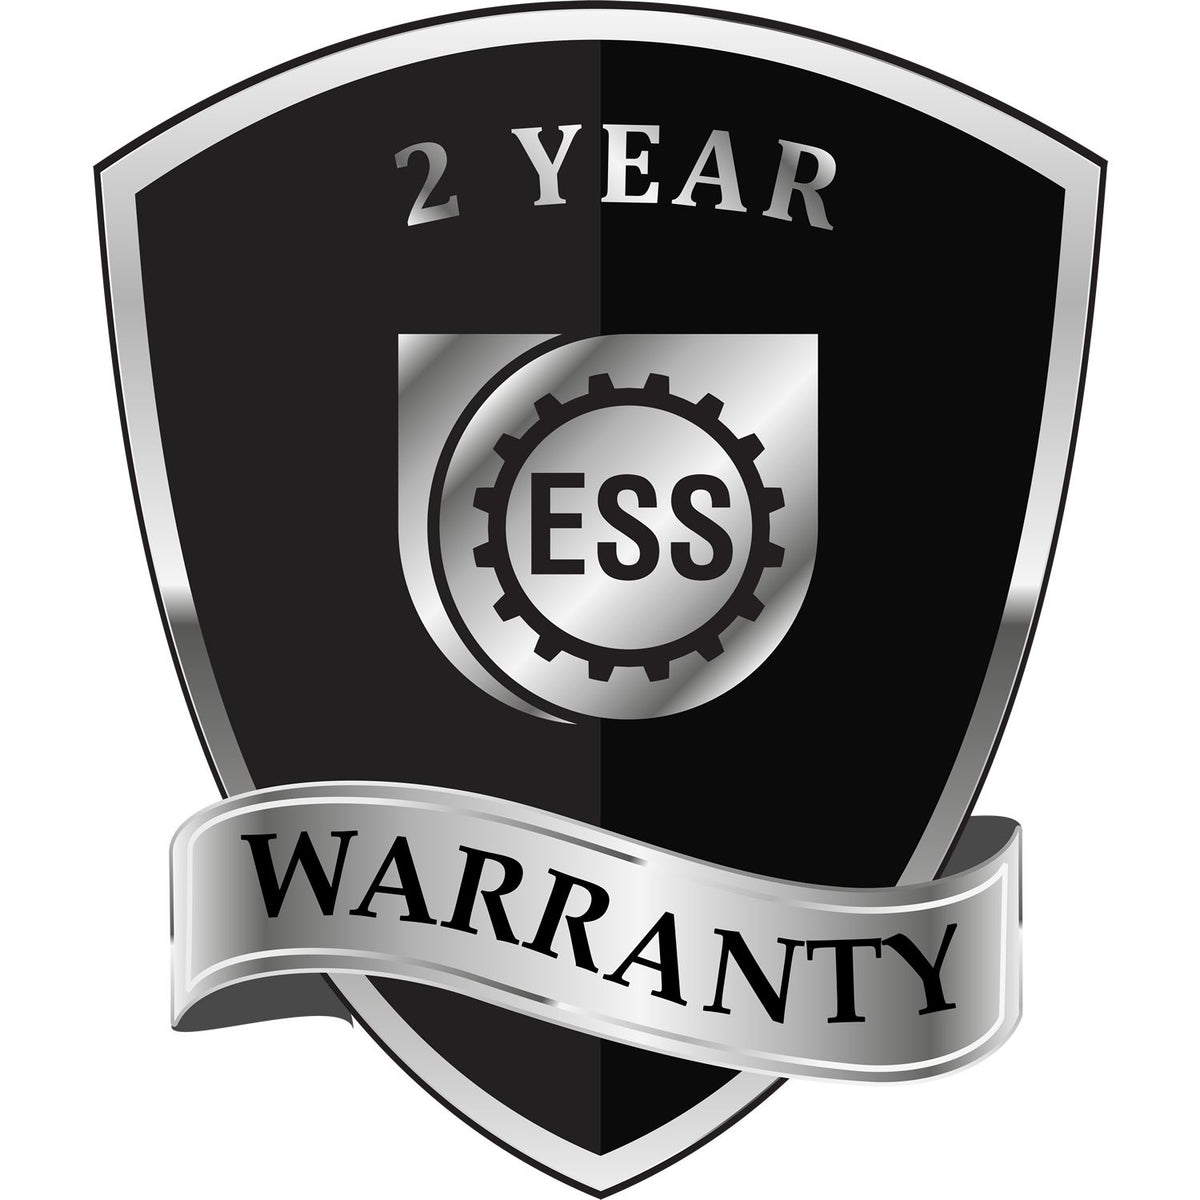 A black and silver badge or emblem showing warranty information for the Hybrid Michigan Architect Seal